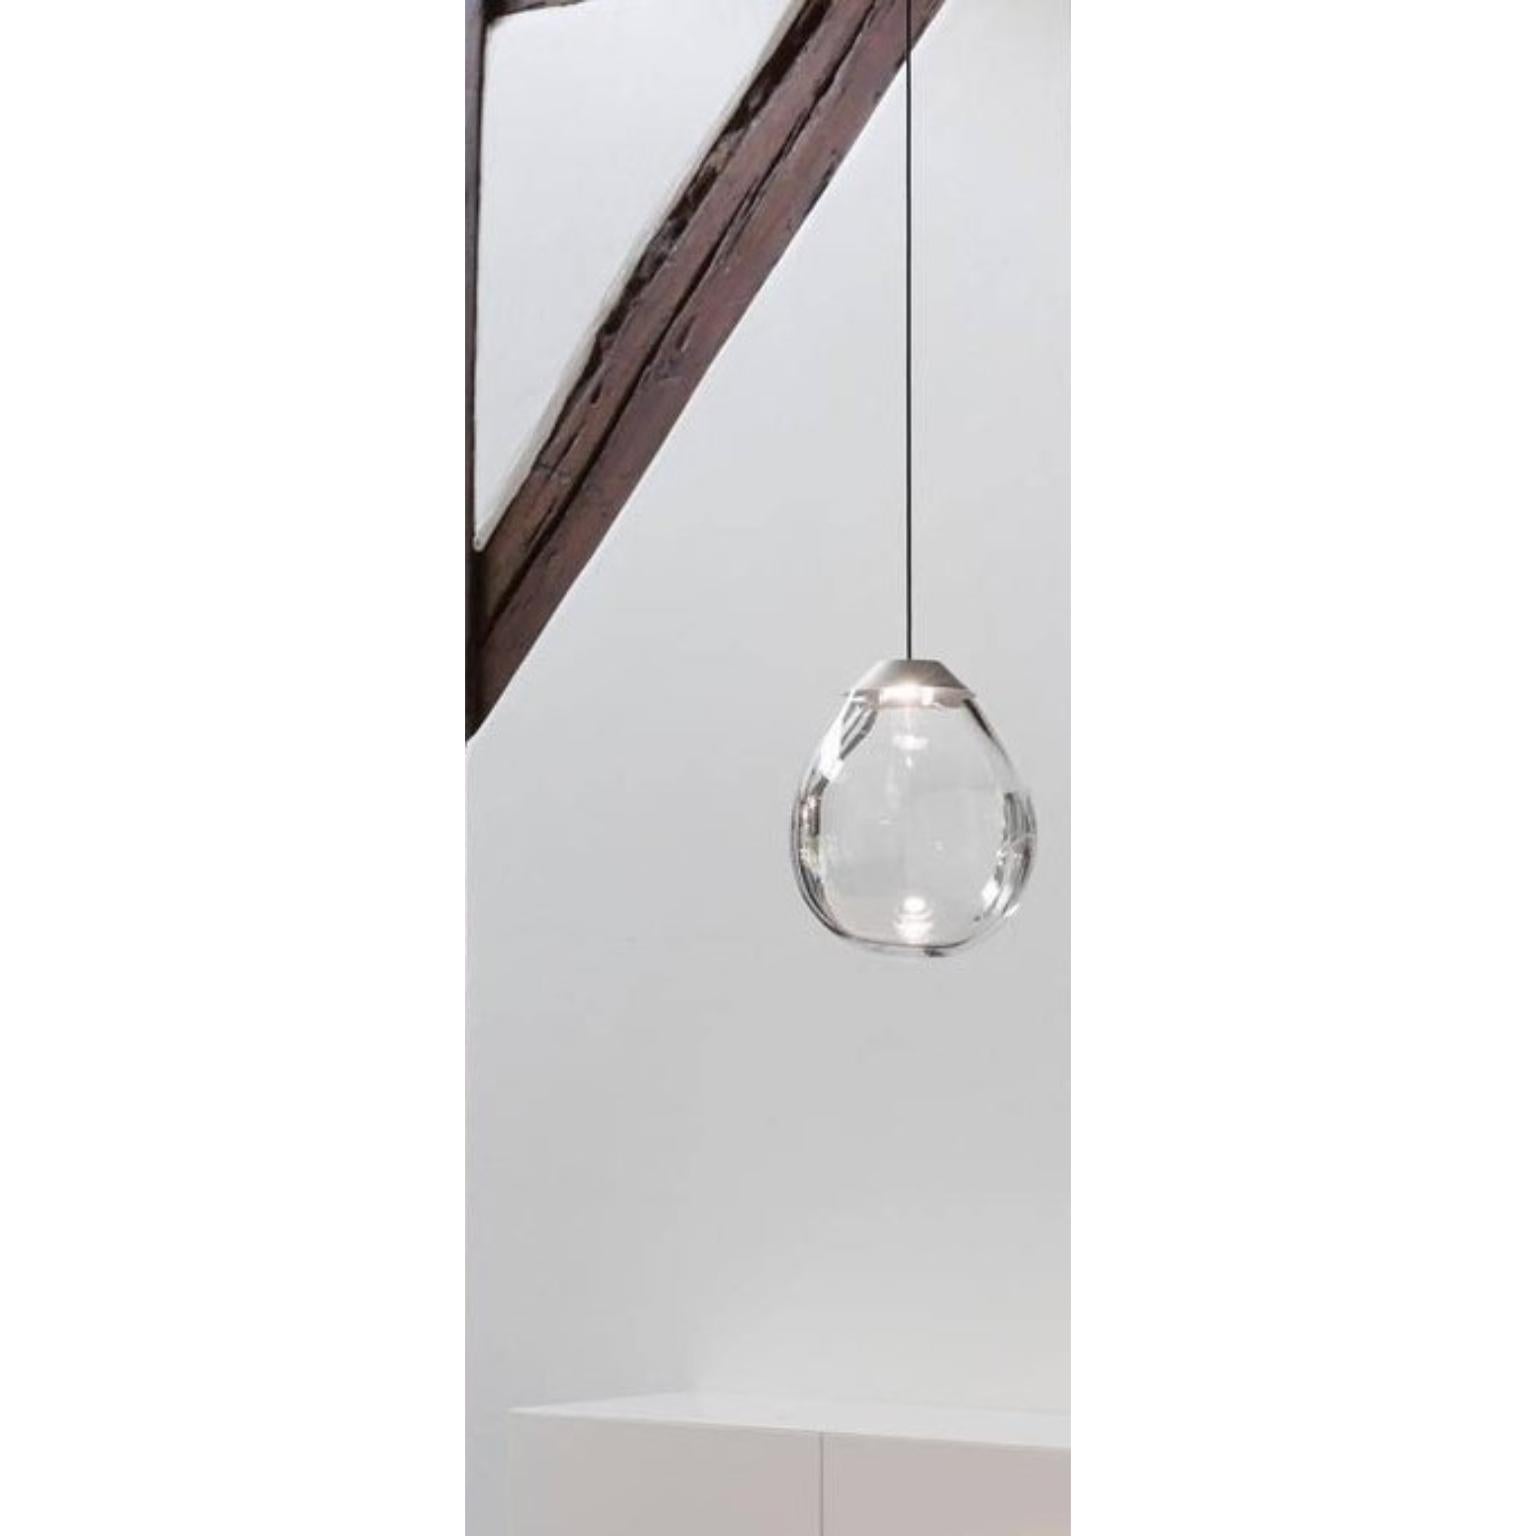 Single momentum blown glass pendants by Alex de Witte
Dimensions: 20 - 25 cm
Materials: Mouth Blown Glass.
Dimensions may vary.

With the Momentum Alex de Witte has found the prefect artistic defining moment while playing with the boundaries of